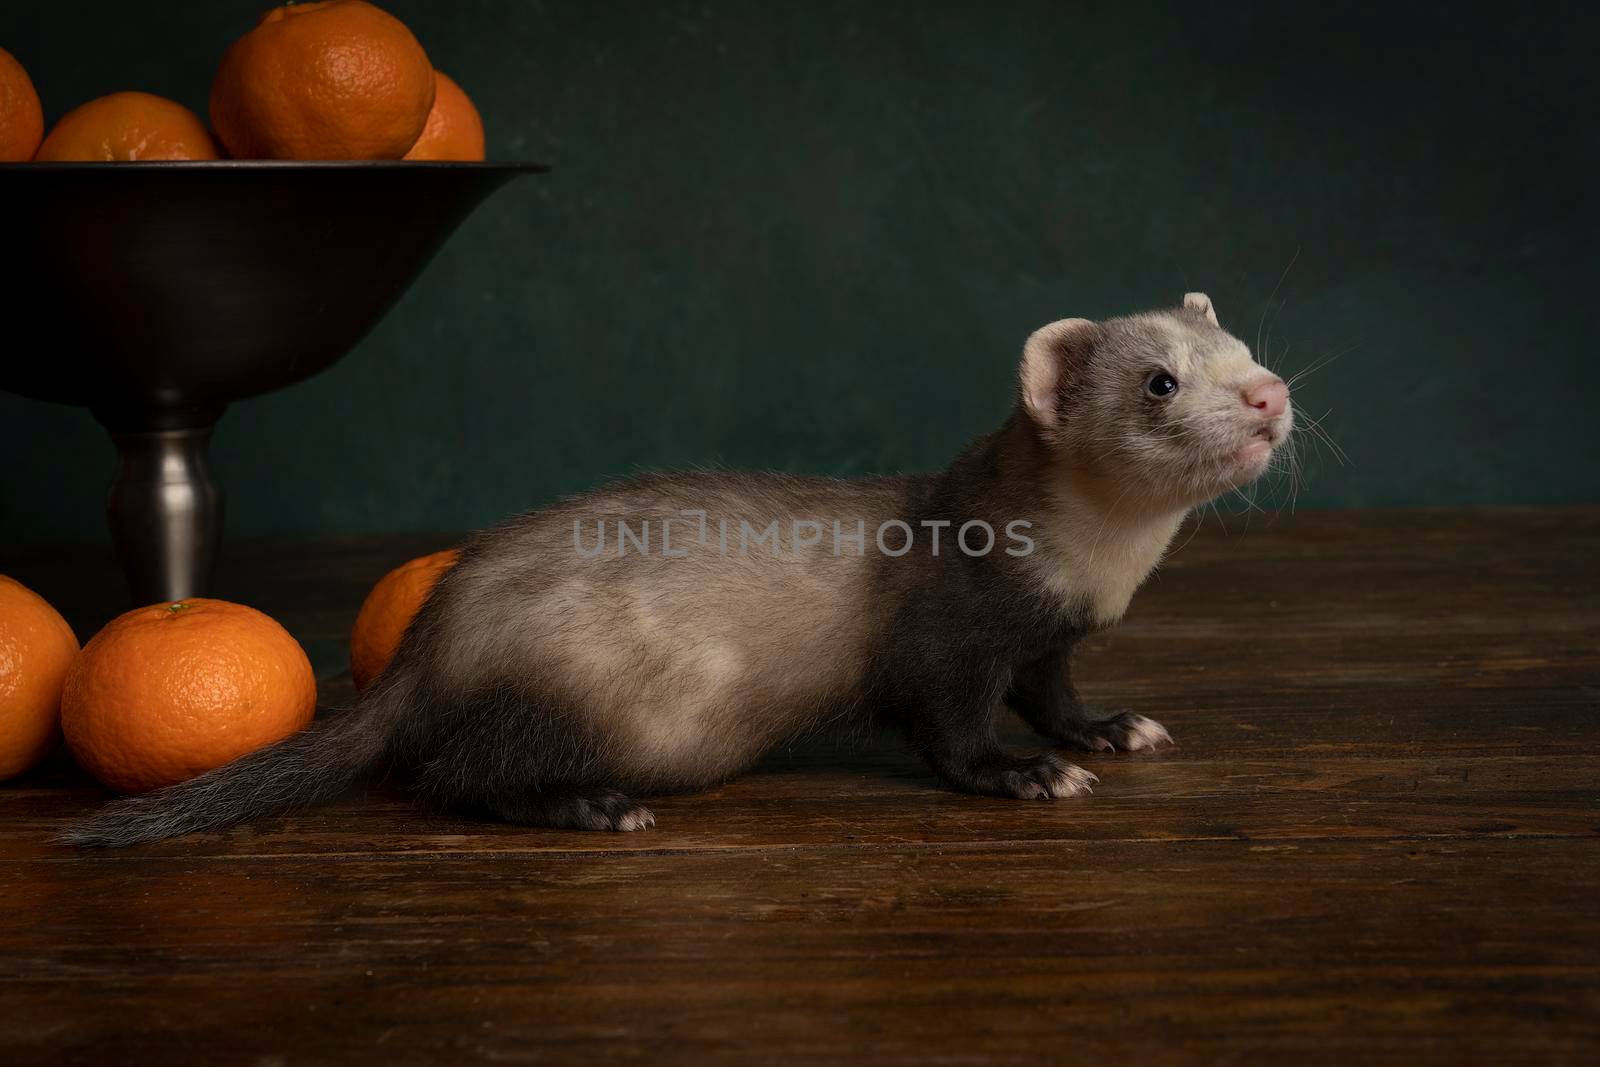 A young ferret or polecat puppy in a stillife scene with tangerines against a green background by LeoniekvanderVliet